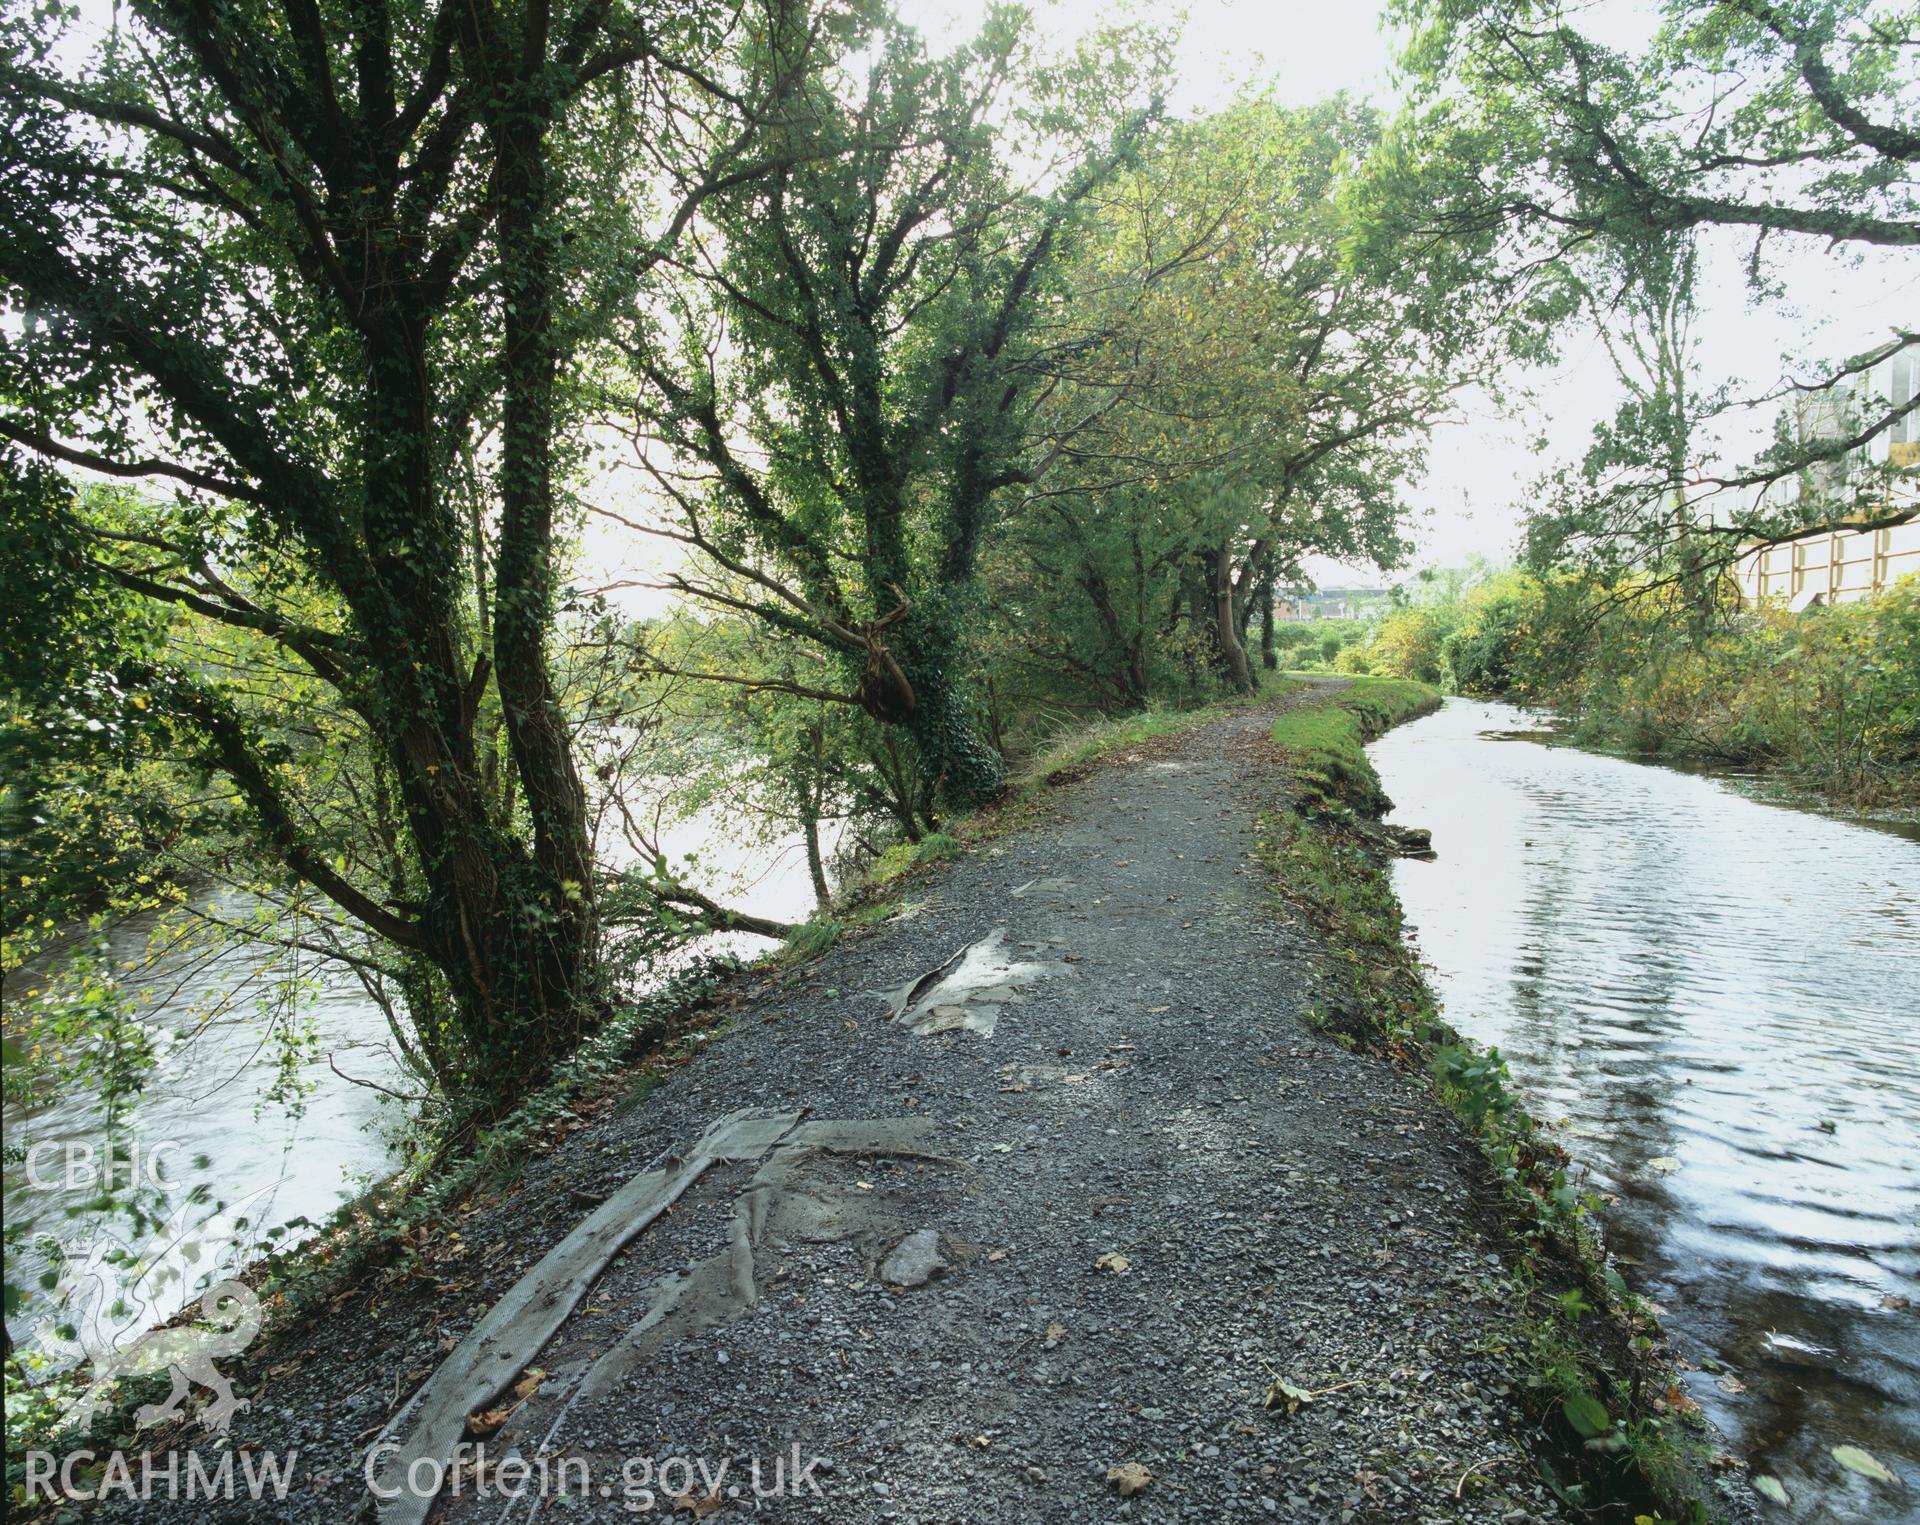 Colour transparency showing  view of a raised embankment at Trebanws, part of Swansea Canal, produced by Iain Wright, October 2005.